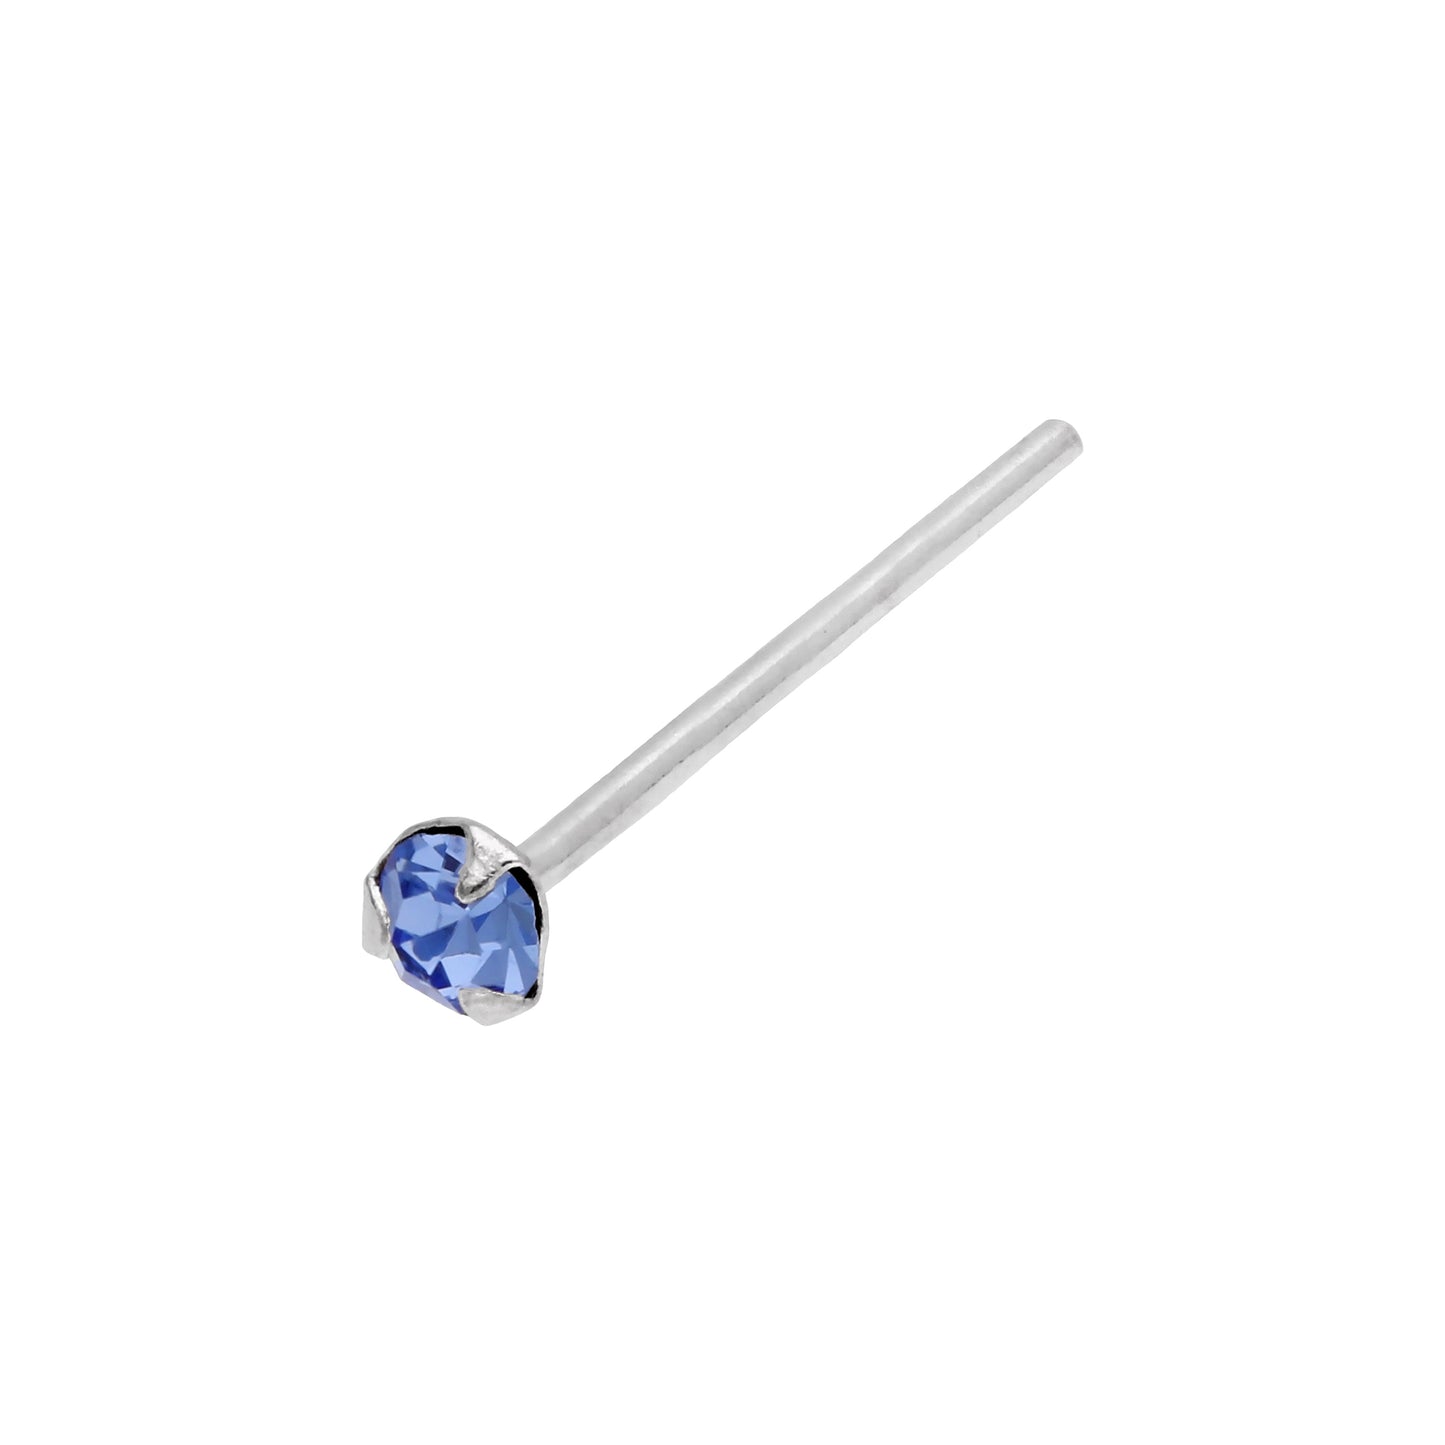 Sterling Silver Lavender CZ 3 Claw Pin End Nose Stud